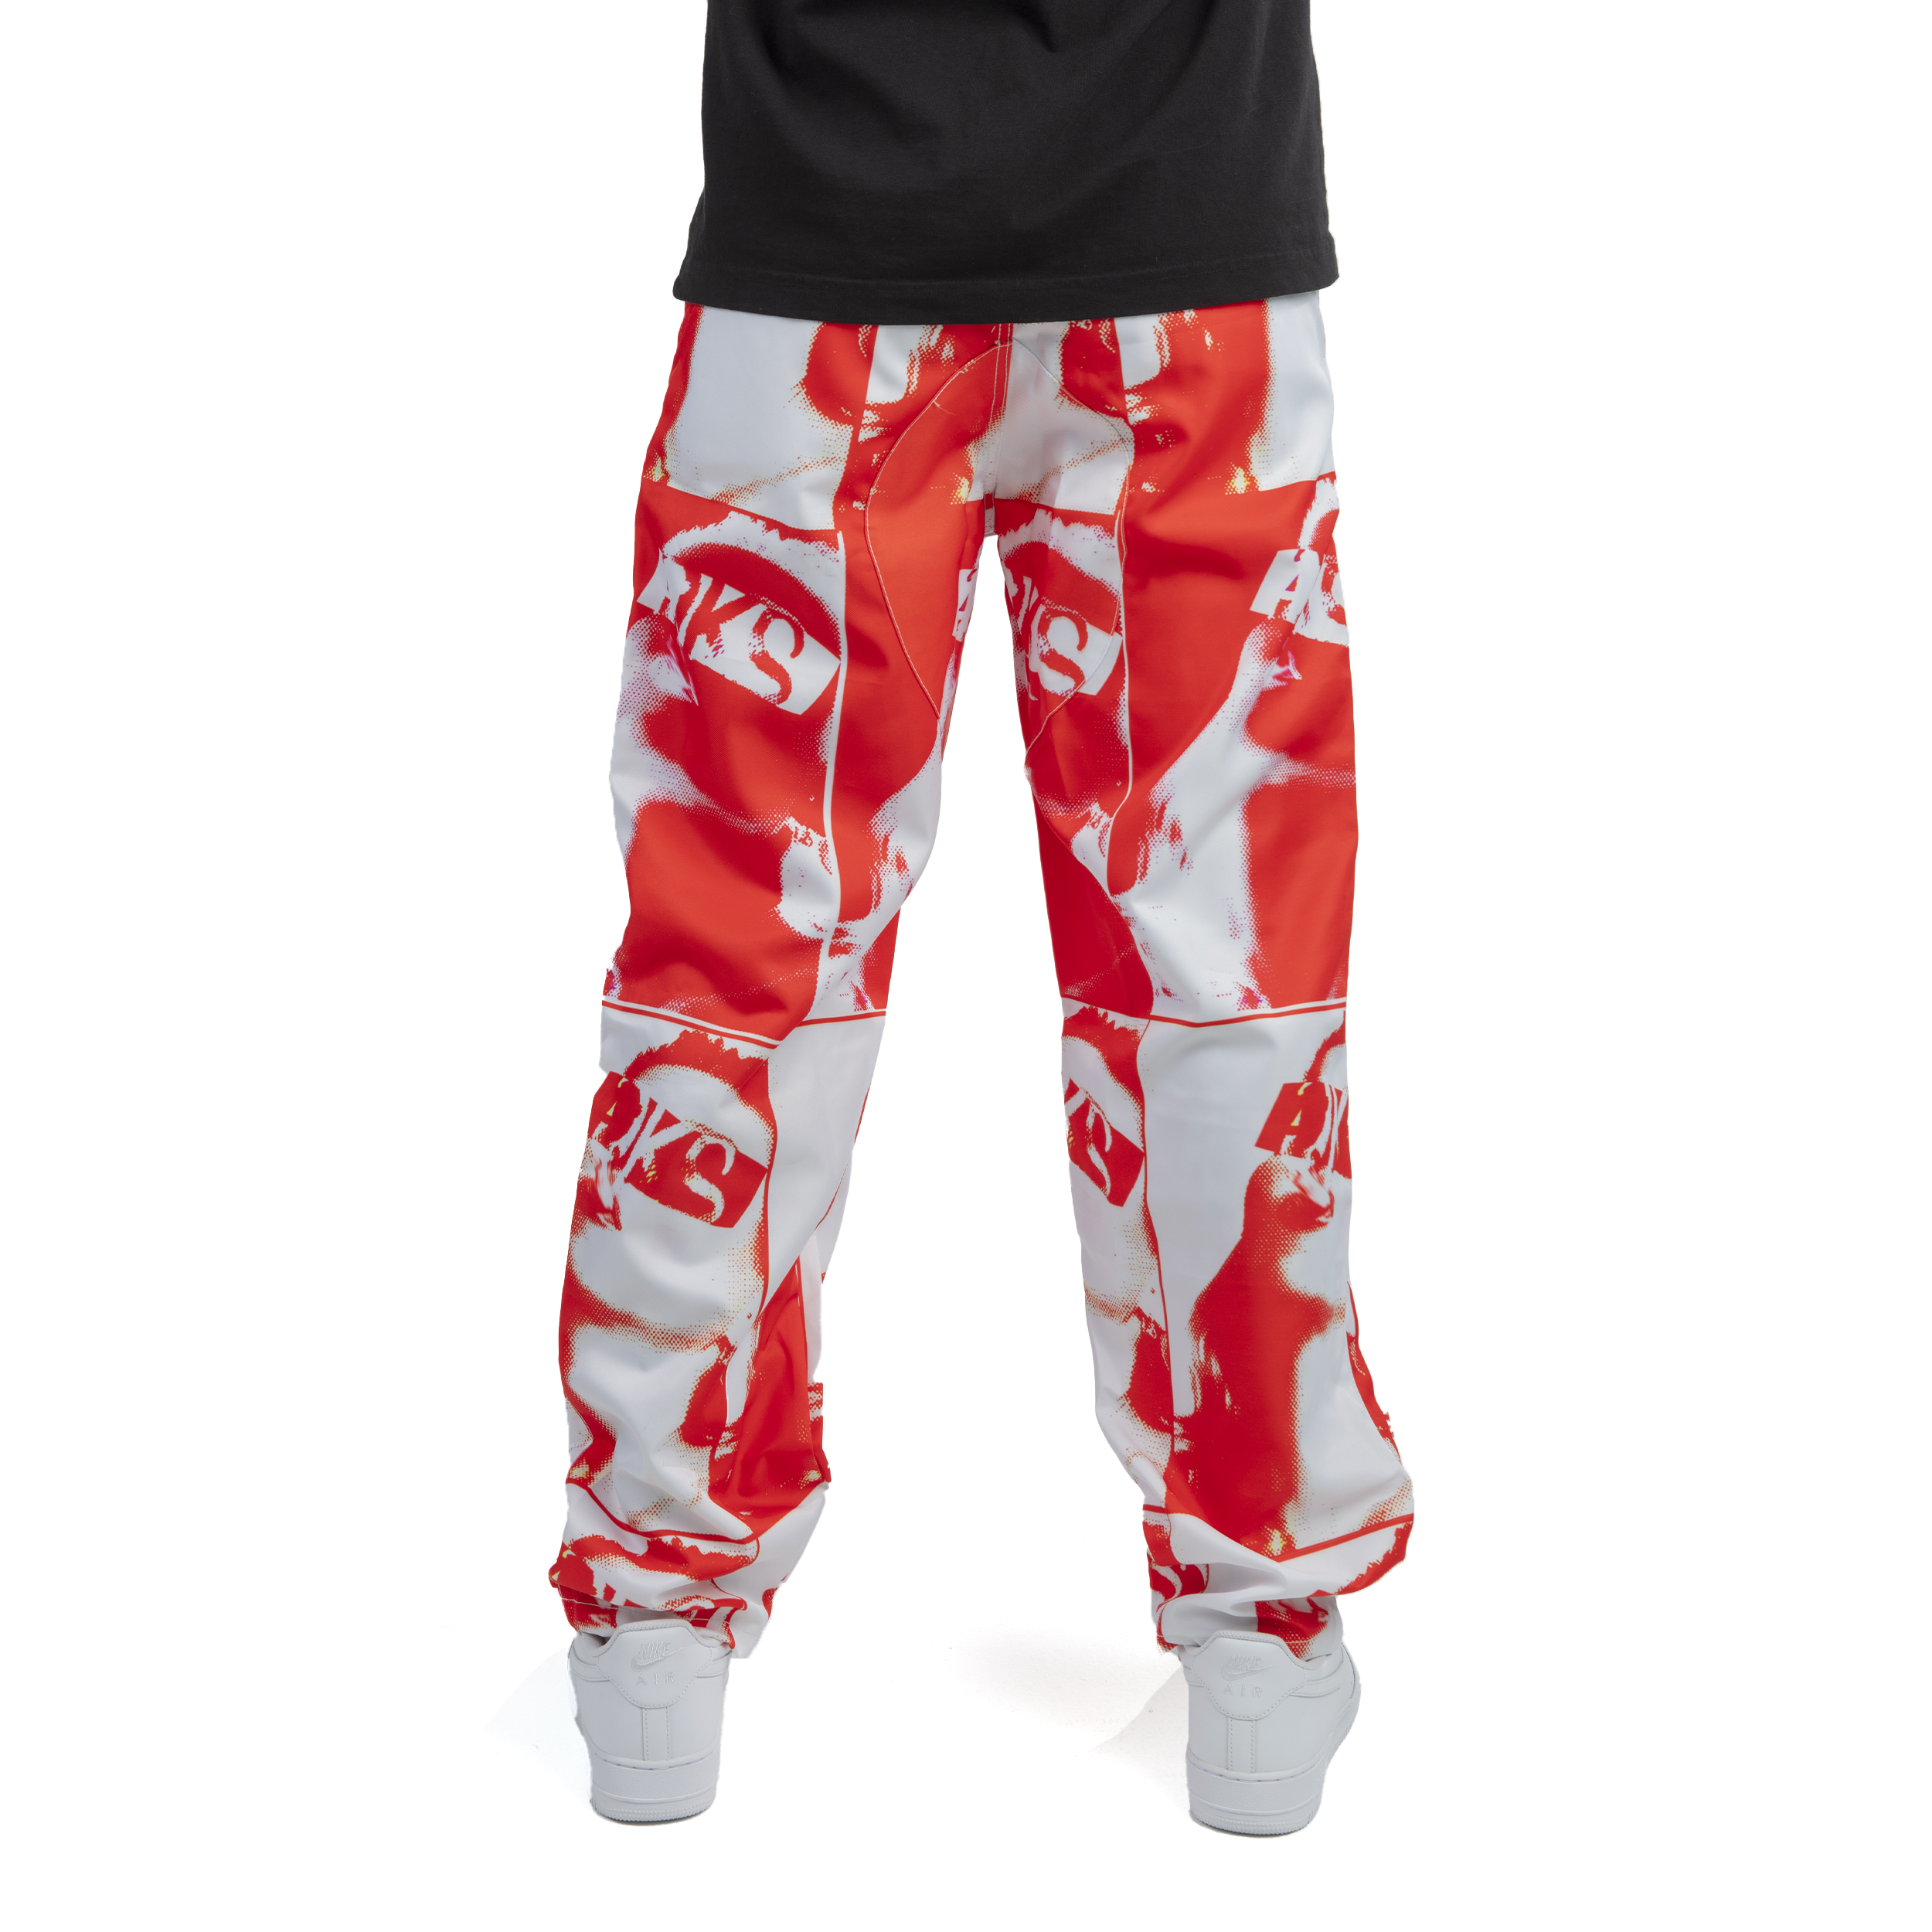 DKS "All Red" Cargo Pants